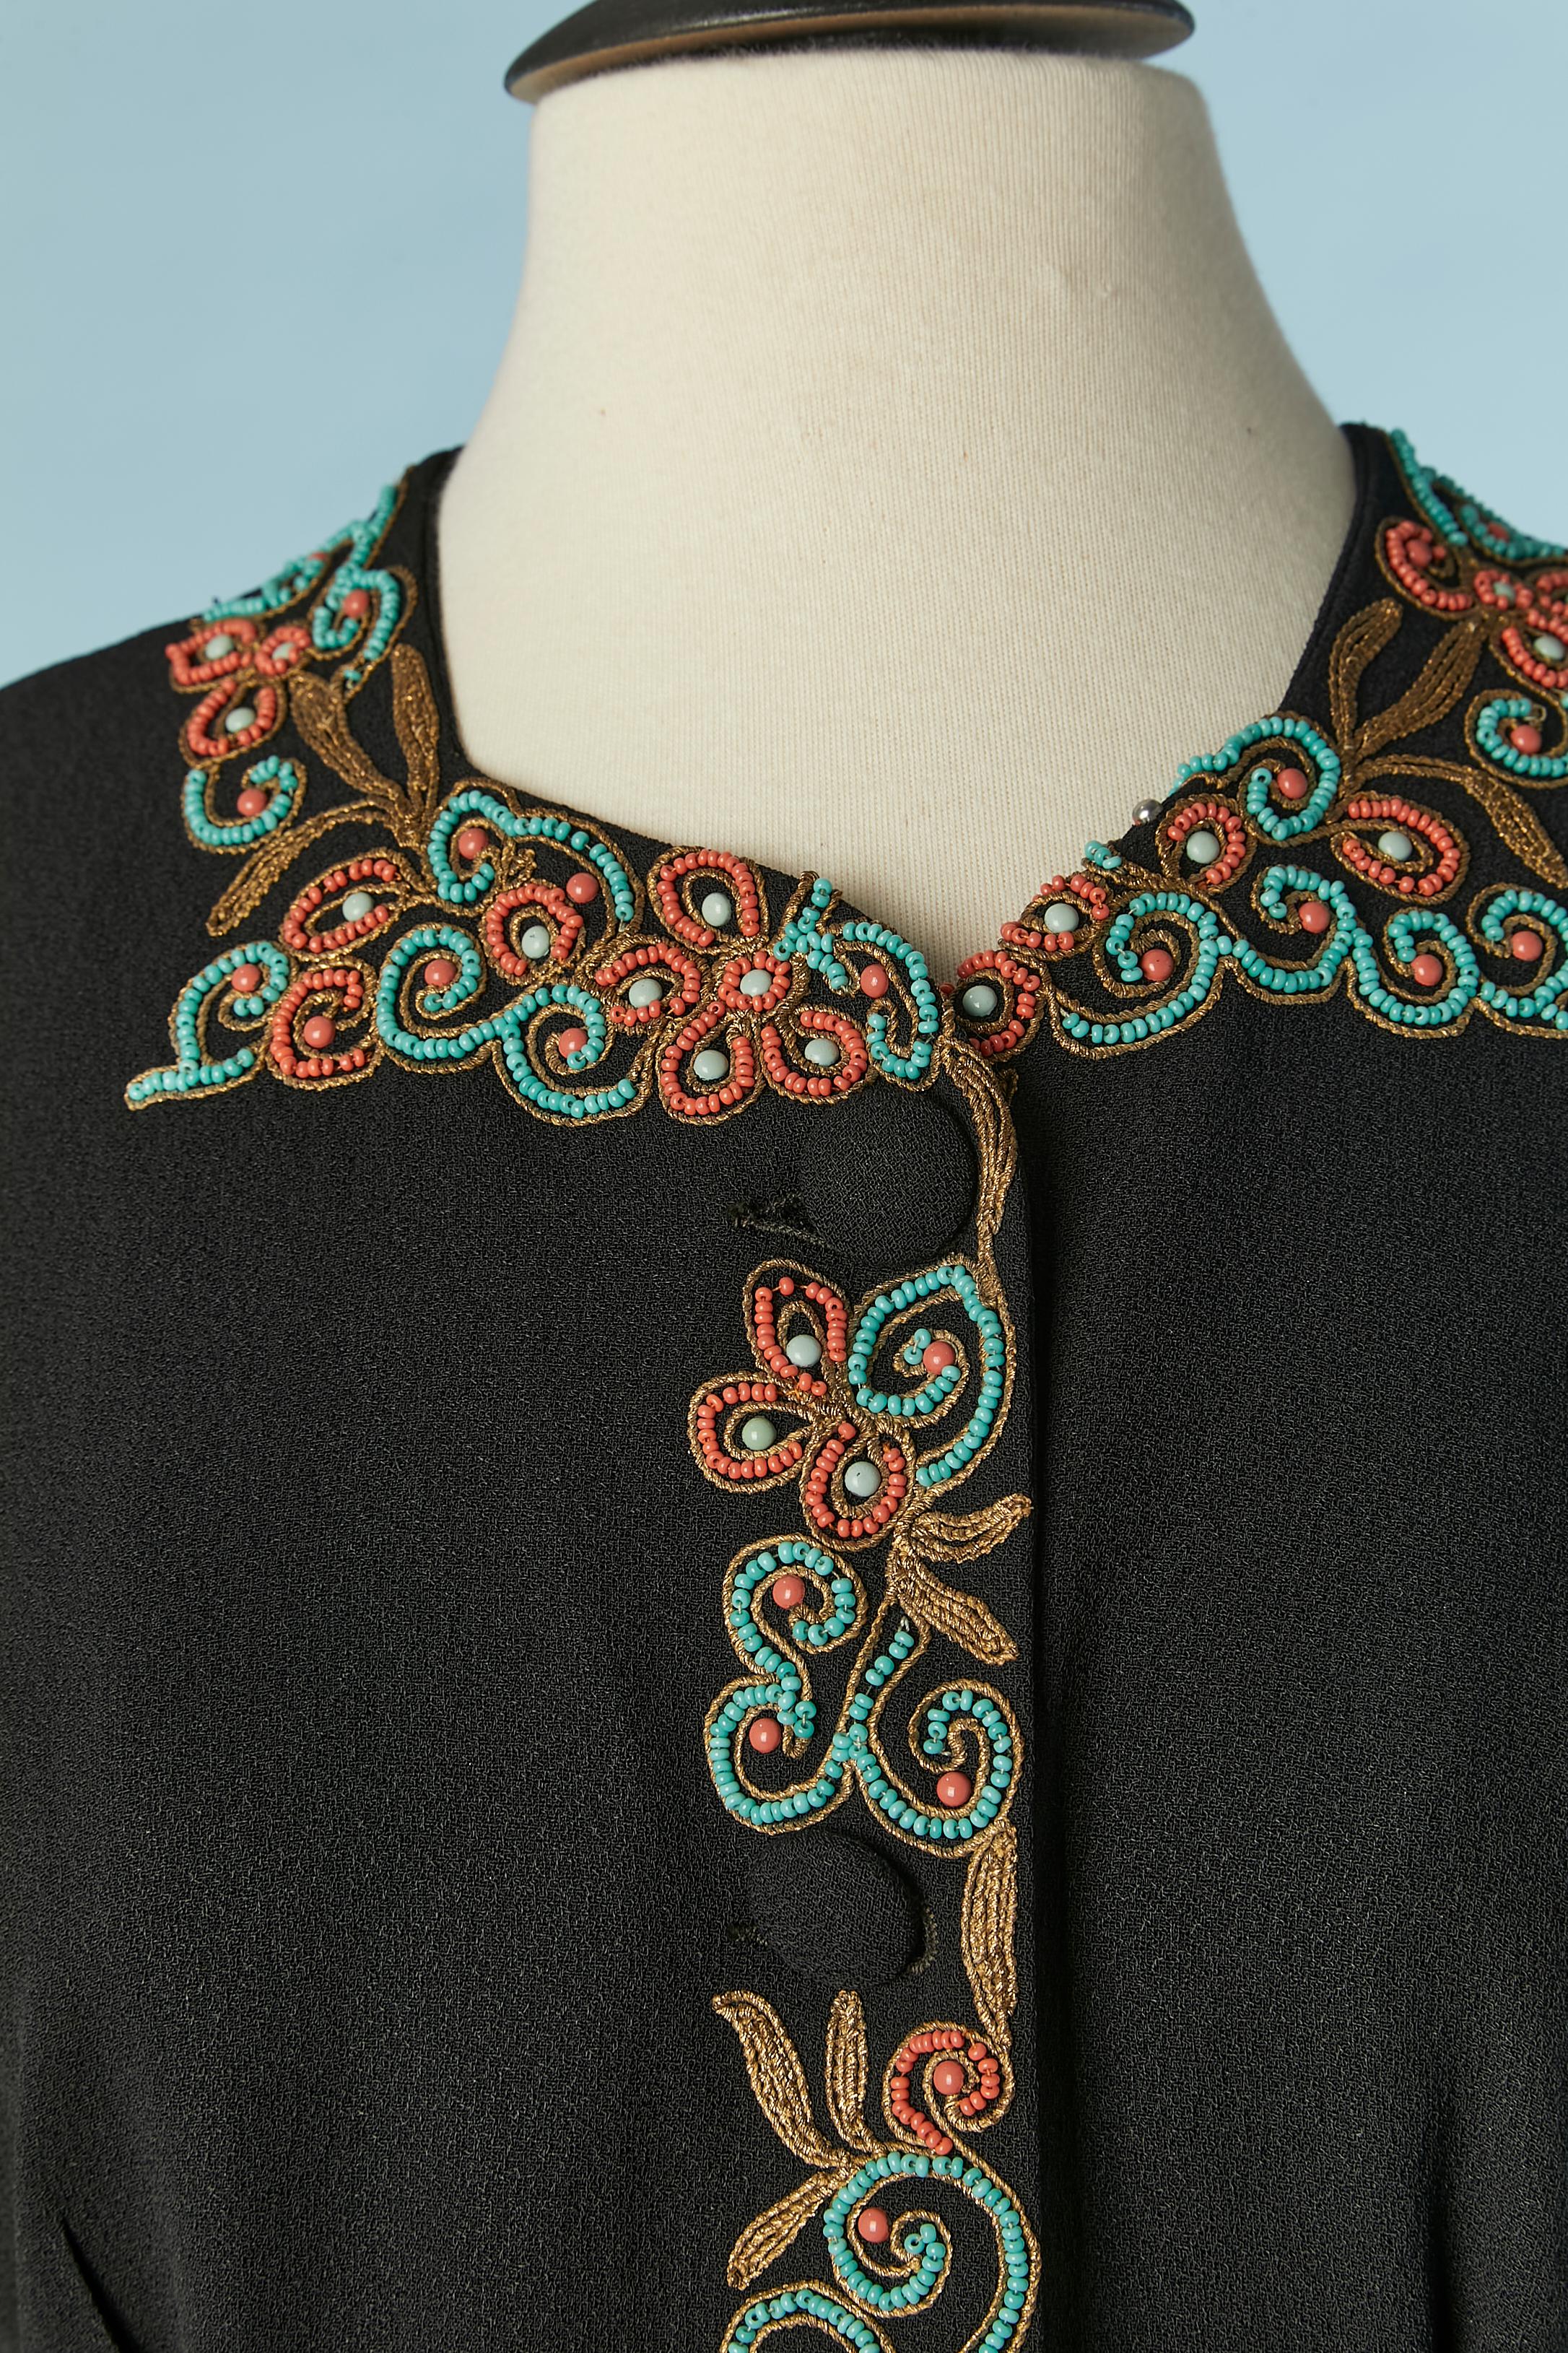 Black crêpe jacket with beaded work on the edge. Button covered with crêpe. 
SIZE S 